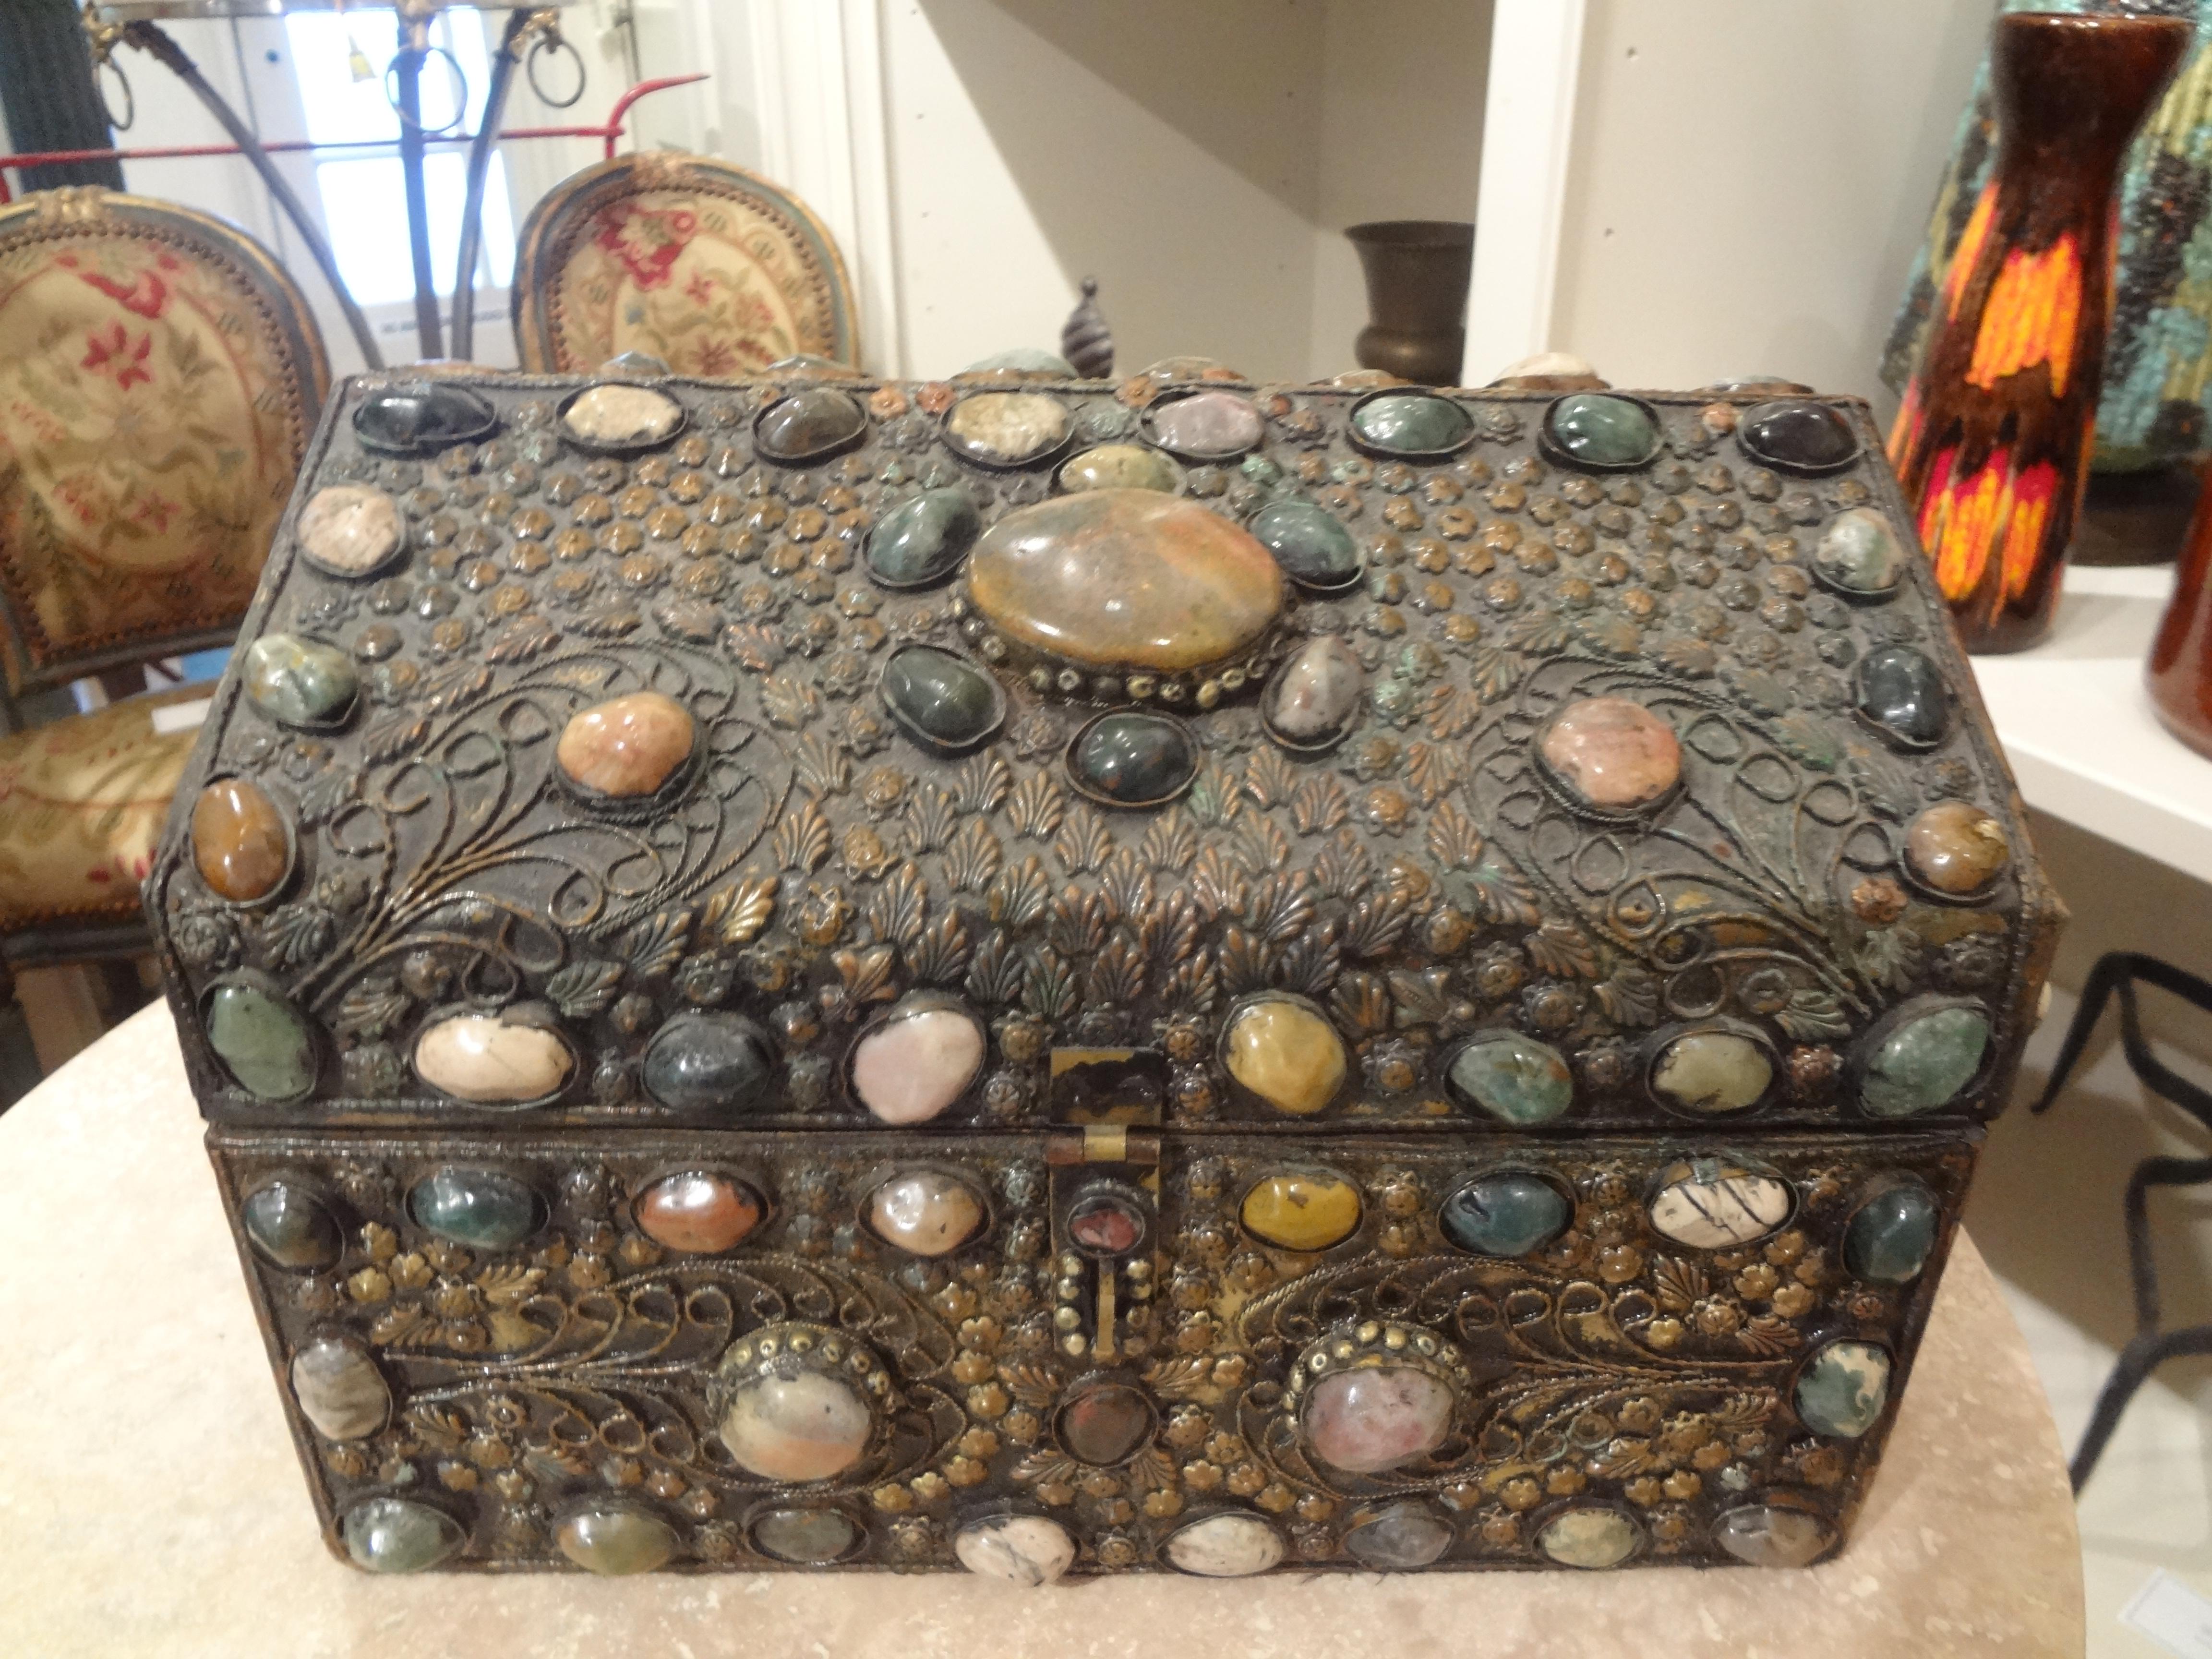 Vintage Moorish Agate encrusted box. This interesting large silver middle eastern metal decorative box is encrusted with multi-colored agate stones in a variety of shapes and sizes. Our stunning Anglo-Indian box, possibly from Morocco makes a great